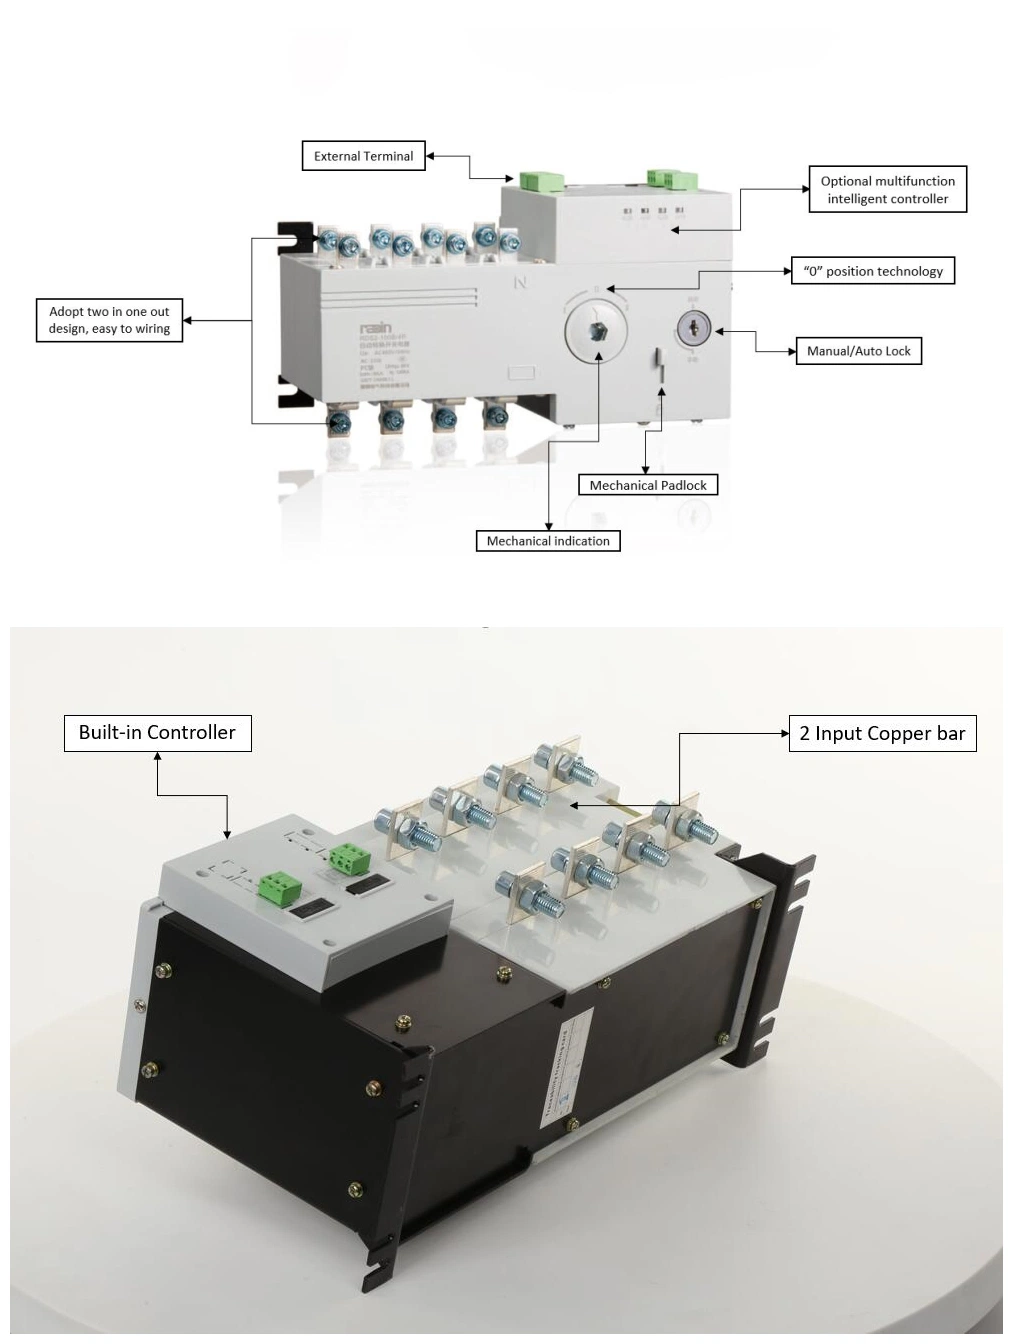 RDS2 Series Normal Power to Reserved Power Changeover Switch